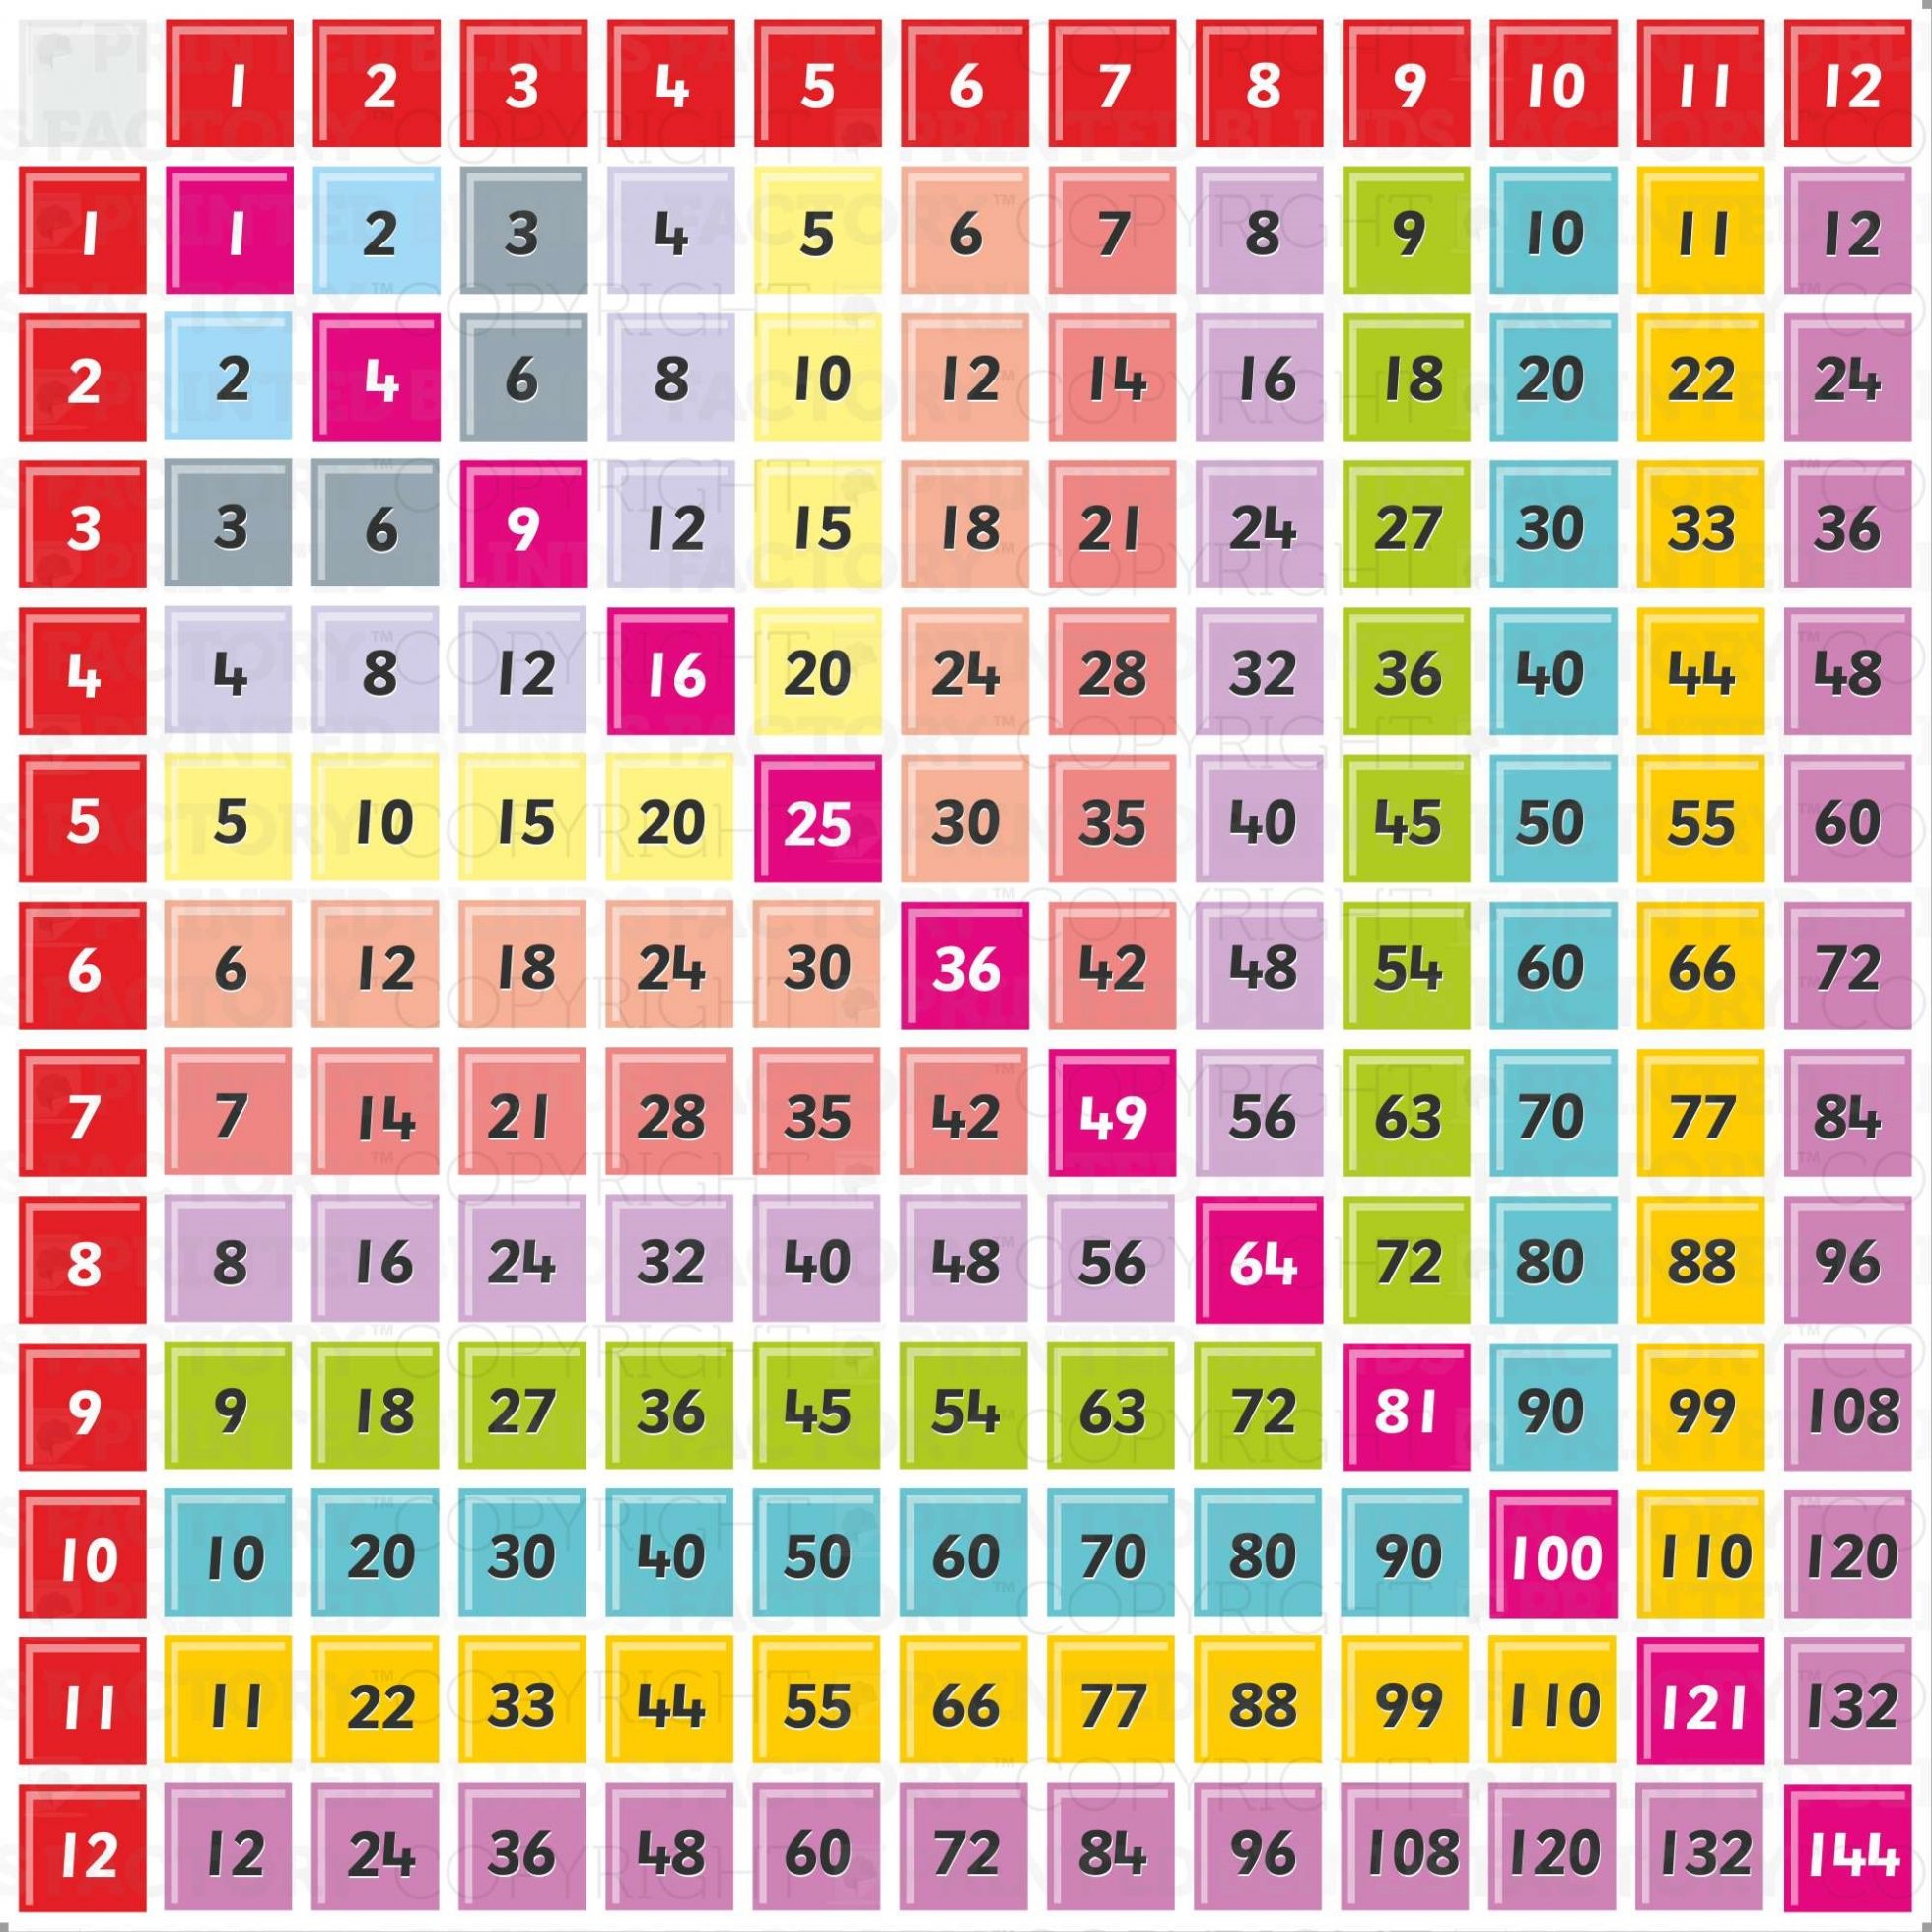 Large Times Table Chart 1 12 Free Table Bar Chart